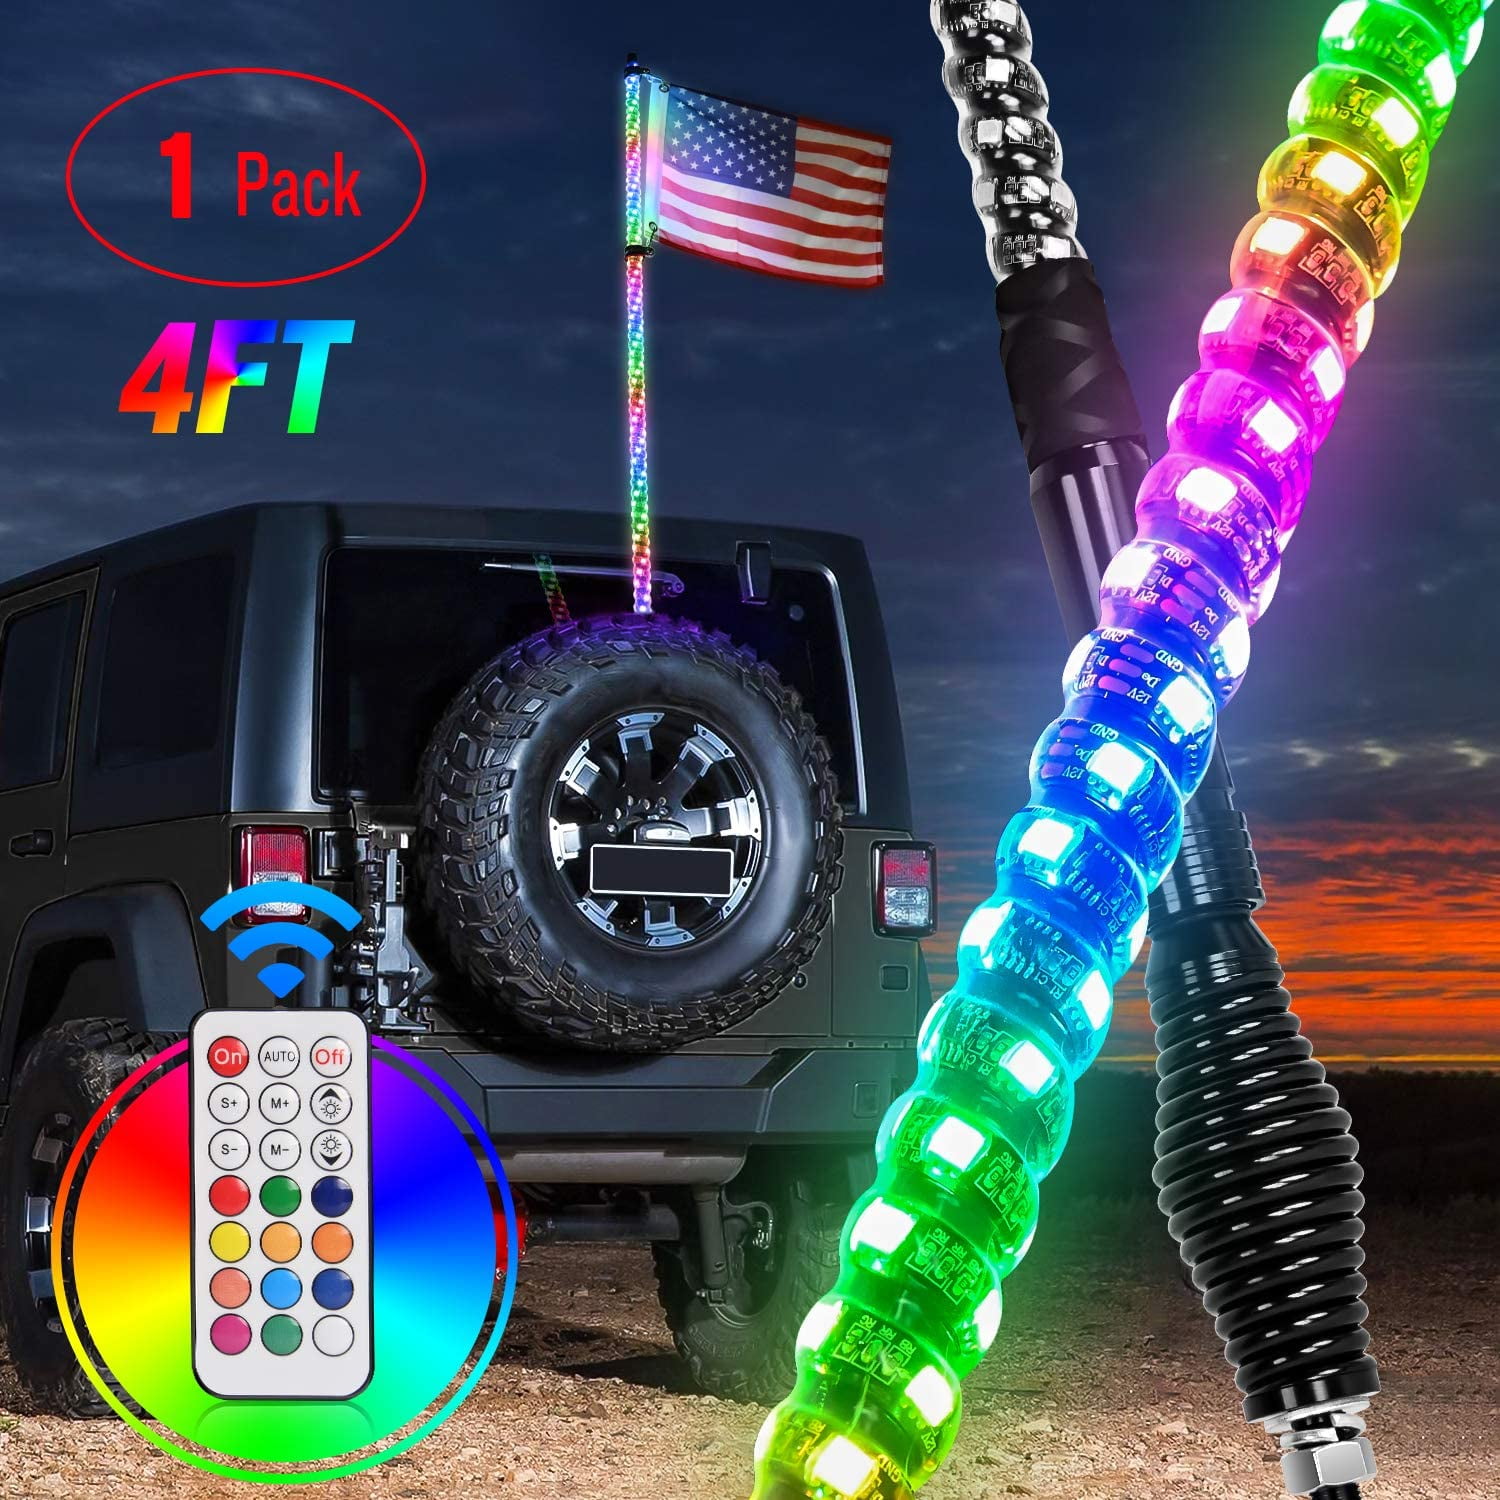 Chasing & Dancing, 4FT 4FT 1PC LED LIGHT WHIP Spiral Dancing & Chasing Light Flag Pole with Wireless Remote Control for ATV UTV Truck Polaris RZR XP 1000 Can am Maverick X3 